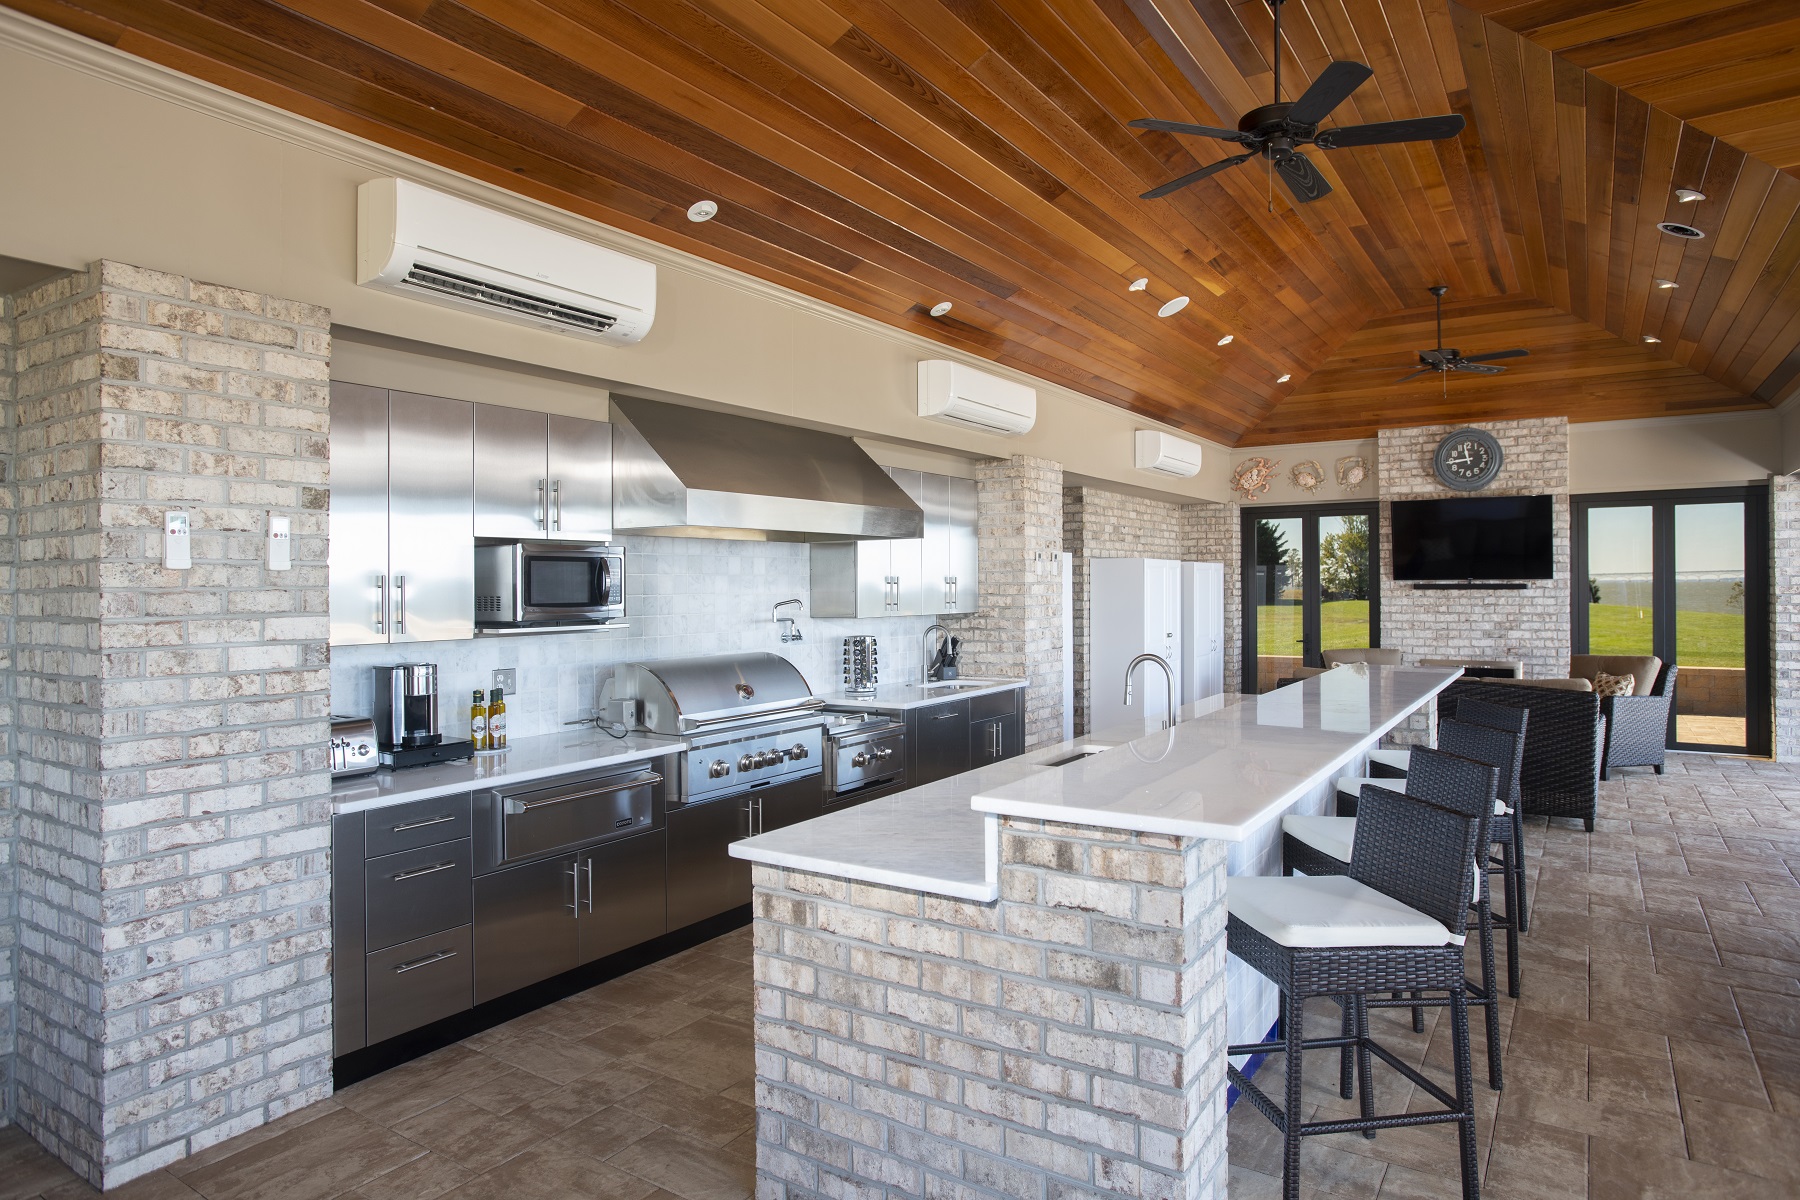 danver_cabinets_stainless_steel_poolhouse_kitchen (2)